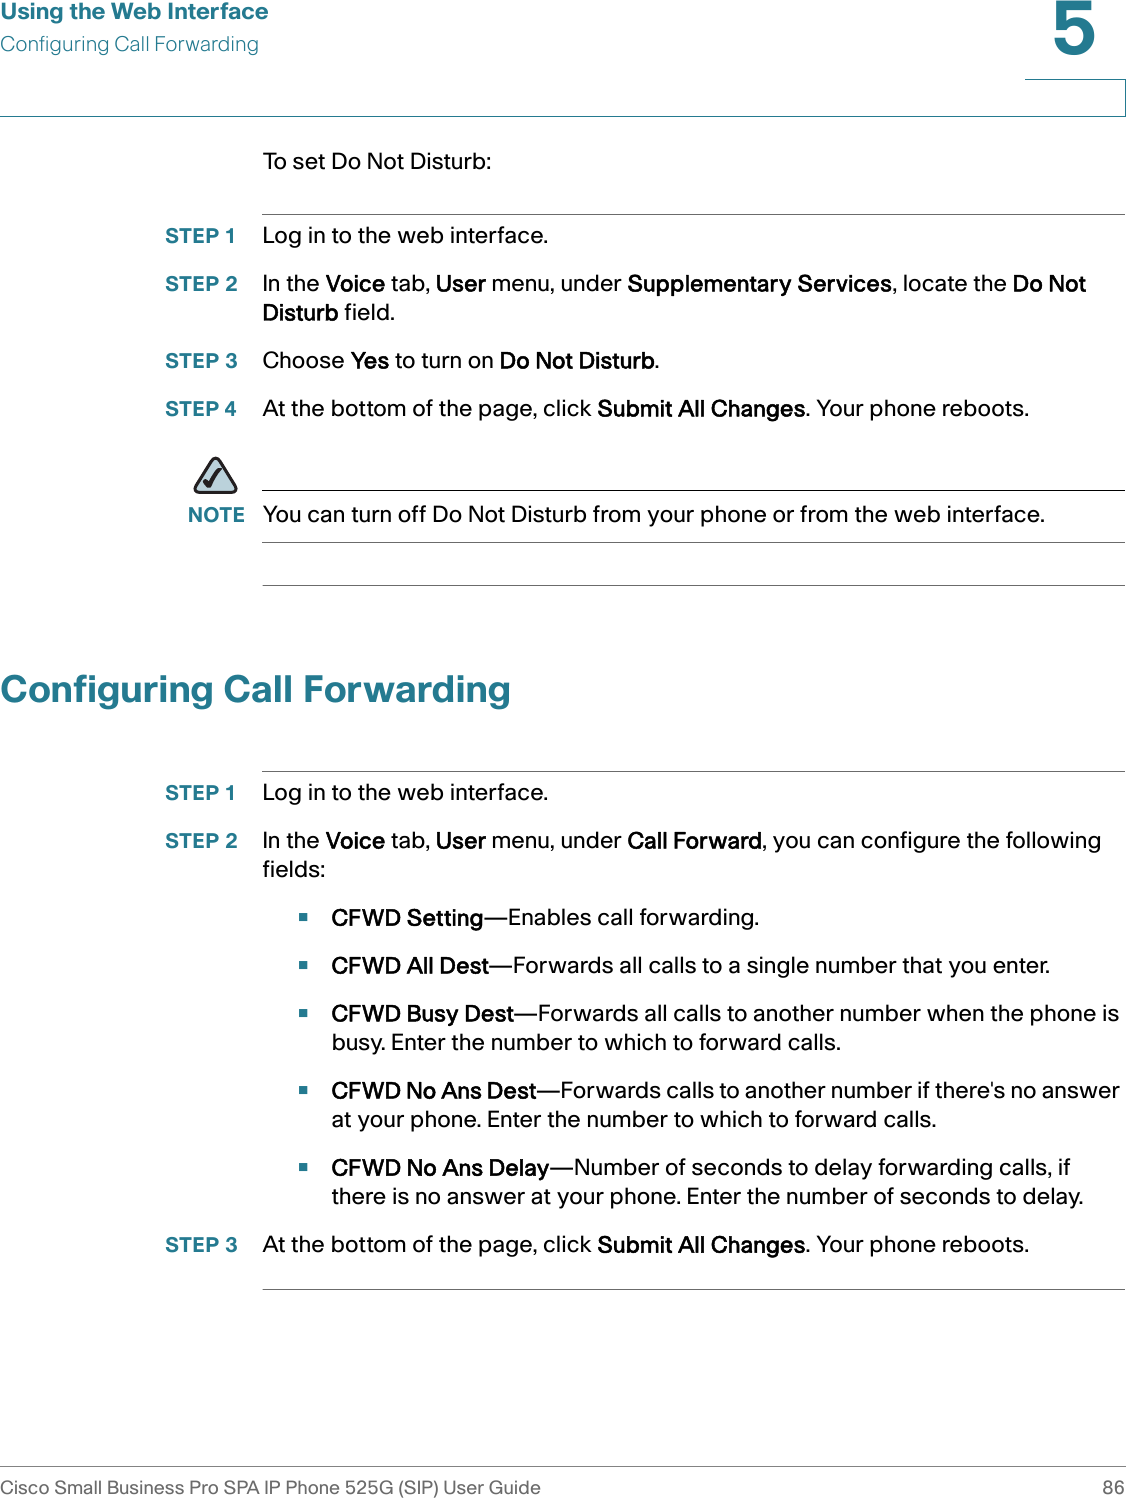 Using the Web InterfaceConfiguring Call ForwardingCisco Small Business Pro SPA IP Phone 525G (SIP) User Guide 865 To  s e t  D o  N o t  D i s t u r b :STEP 1 Log in to the web interface.STEP 2 In the Voice tab, User menu, under Supplementary Services, locate the Do Not Disturb field.STEP 3 Choose Yes to turn on Do Not Disturb.STEP 4 At the bottom of the page, click Submit All Changes. Your phone reboots.NOTE You can turn off Do Not Disturb from your phone or from the web interface.Configuring Call ForwardingSTEP 1 Log in to the web interface.STEP 2 In the Voice tab, User menu, under Call Forward, you can configure the following fields:•CFWD Setting—Enables call forwarding.•CFWD All Dest—Forwards all calls to a single number that you enter.•CFWD Busy Dest—Forwards all calls to another number when the phone is busy. Enter the number to which to forward calls.•CFWD No Ans Dest—Forwards calls to another number if there&apos;s no answer at your phone. Enter the number to which to forward calls.•CFWD No Ans Delay—Number of seconds to delay forwarding calls, if there is no answer at your phone. Enter the number of seconds to delay.STEP 3 At the bottom of the page, click Submit All Changes. Your phone reboots.